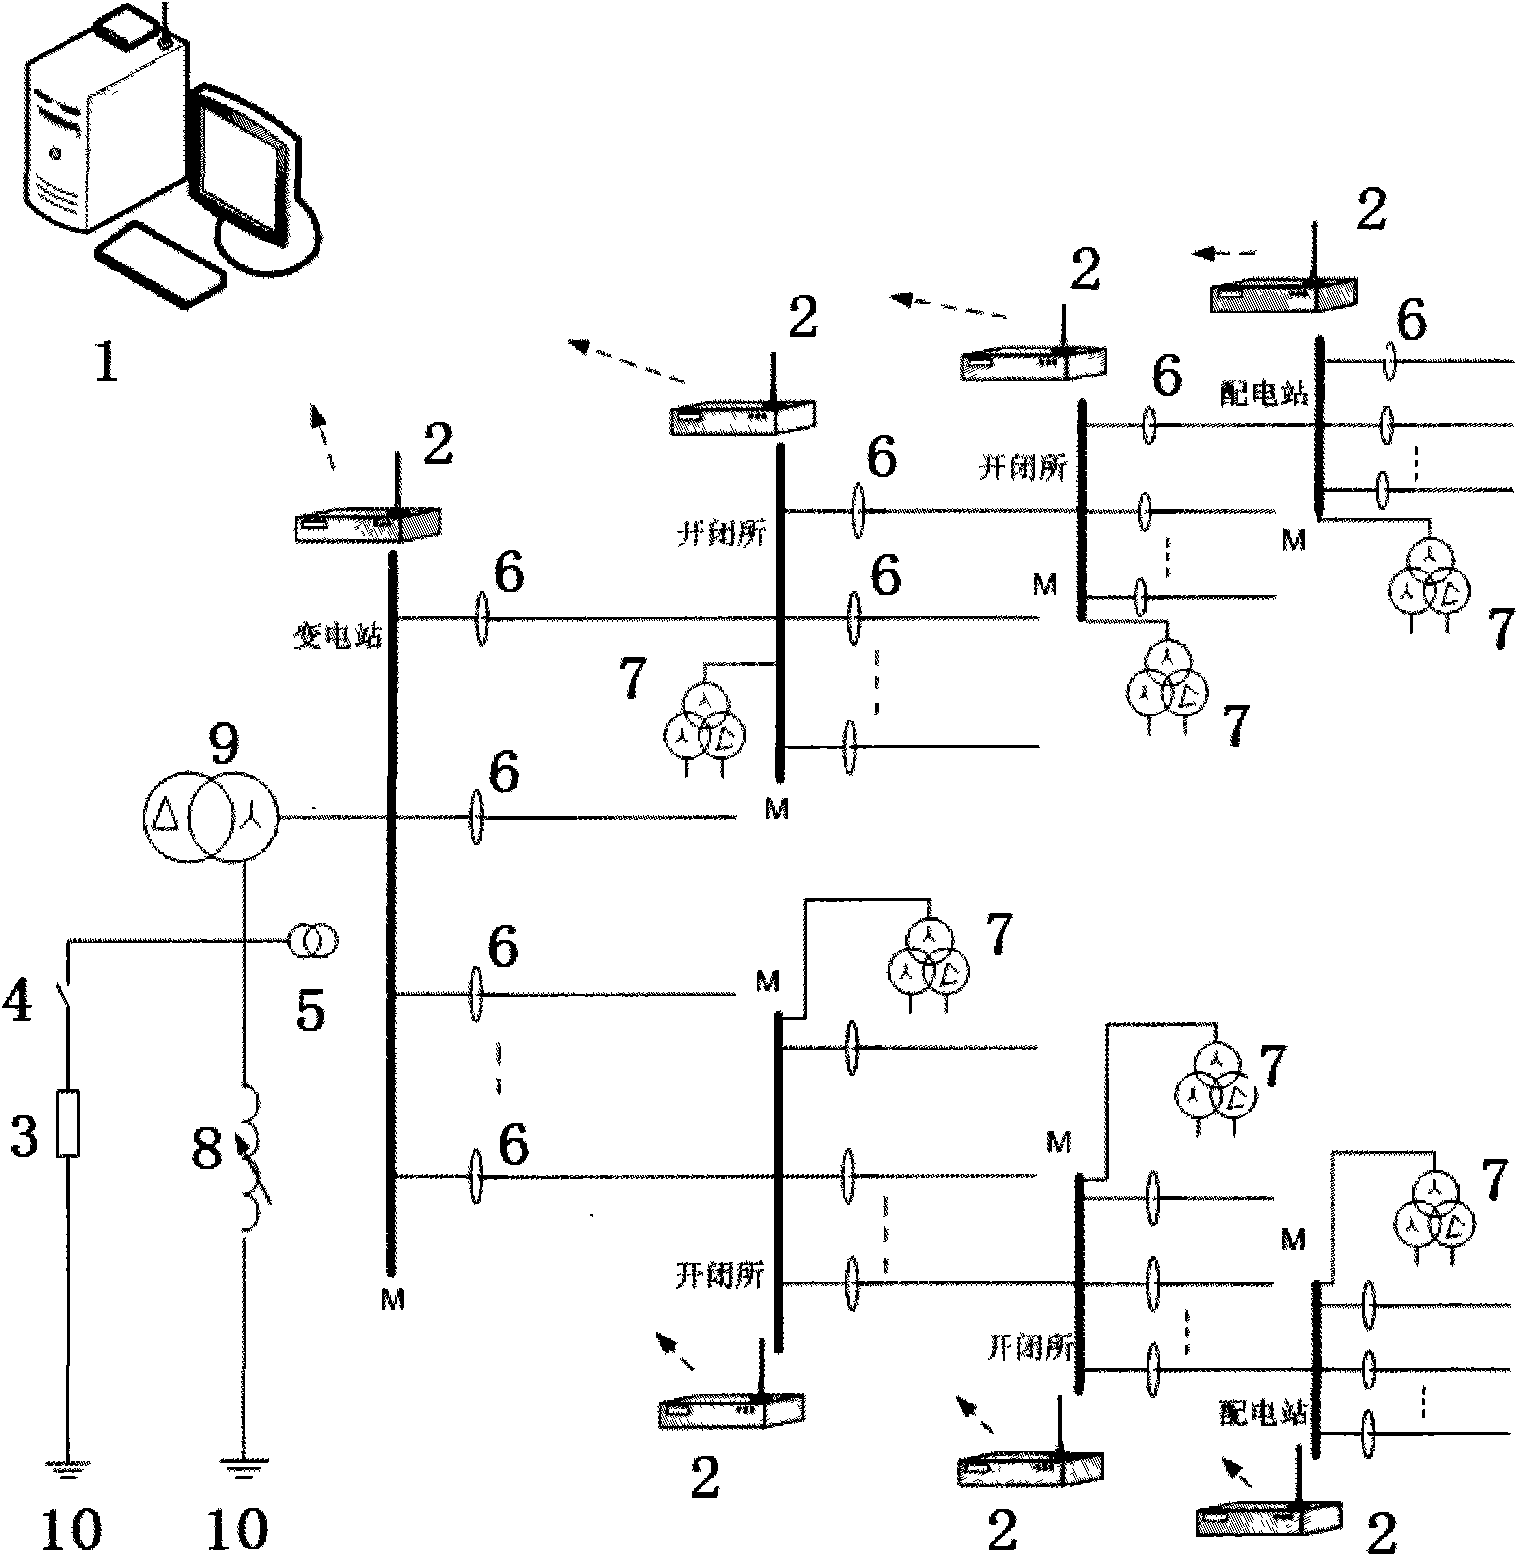 Power distribution network fault positioning method